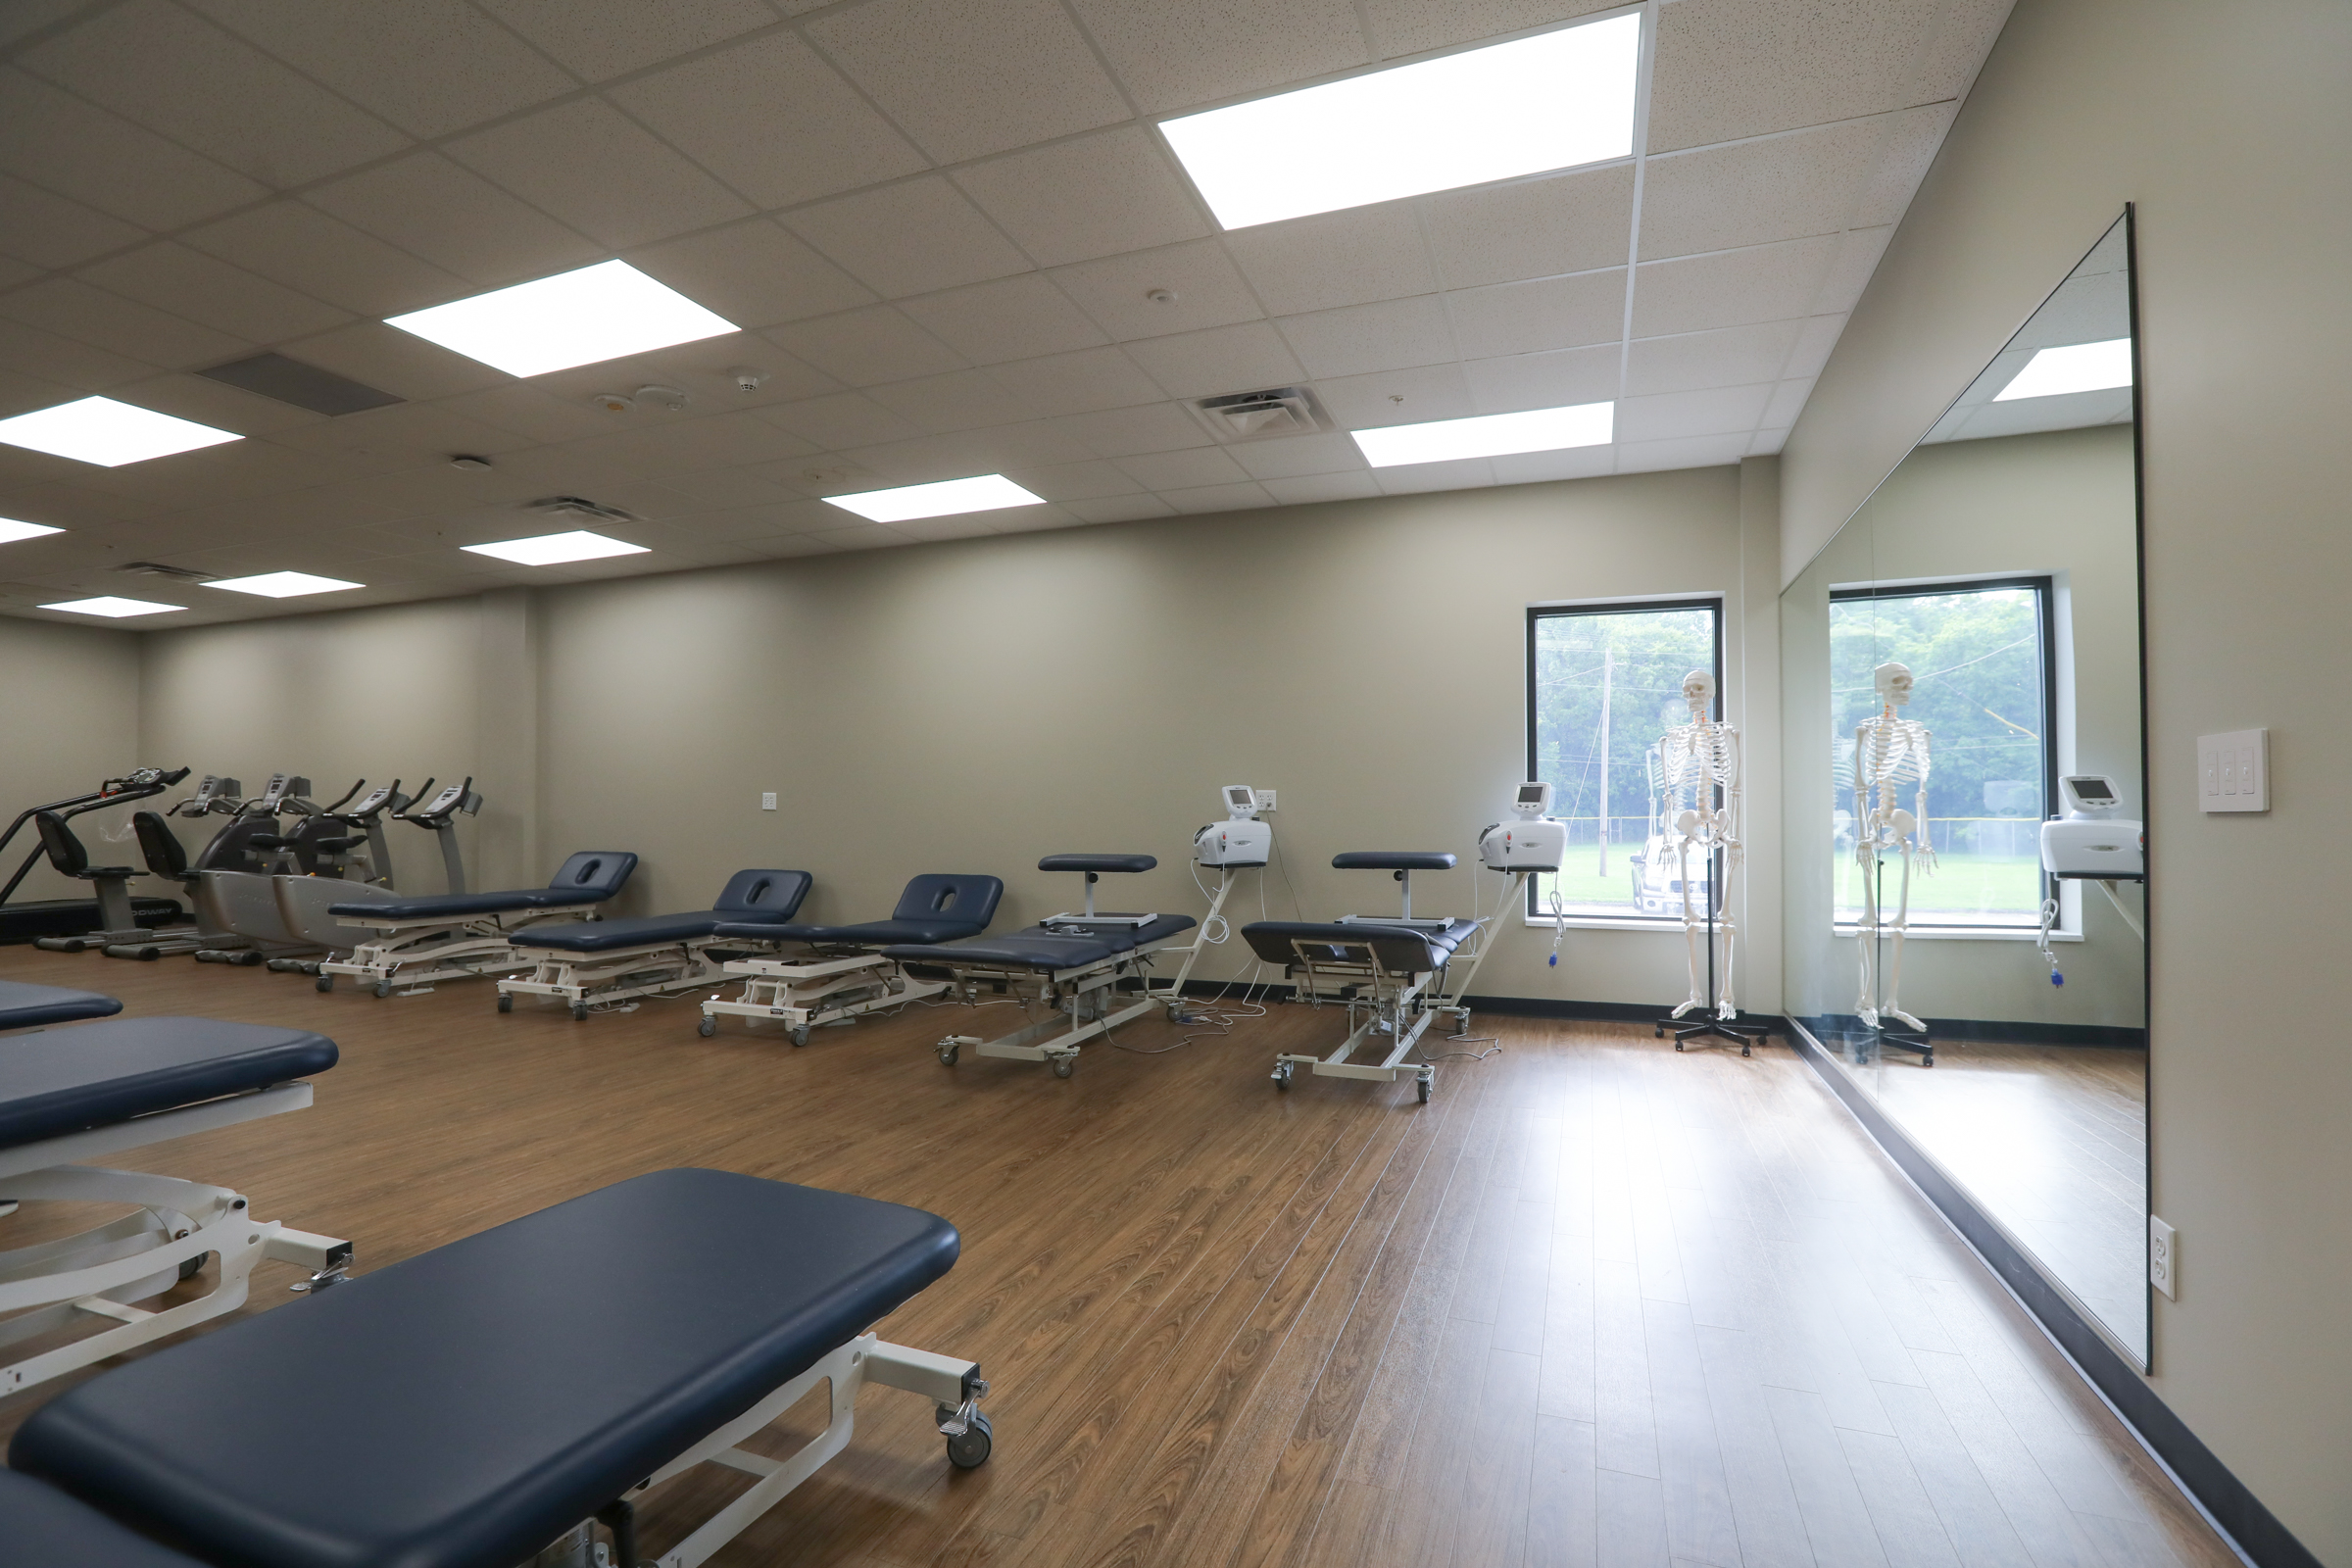 Physical Therapist classroom